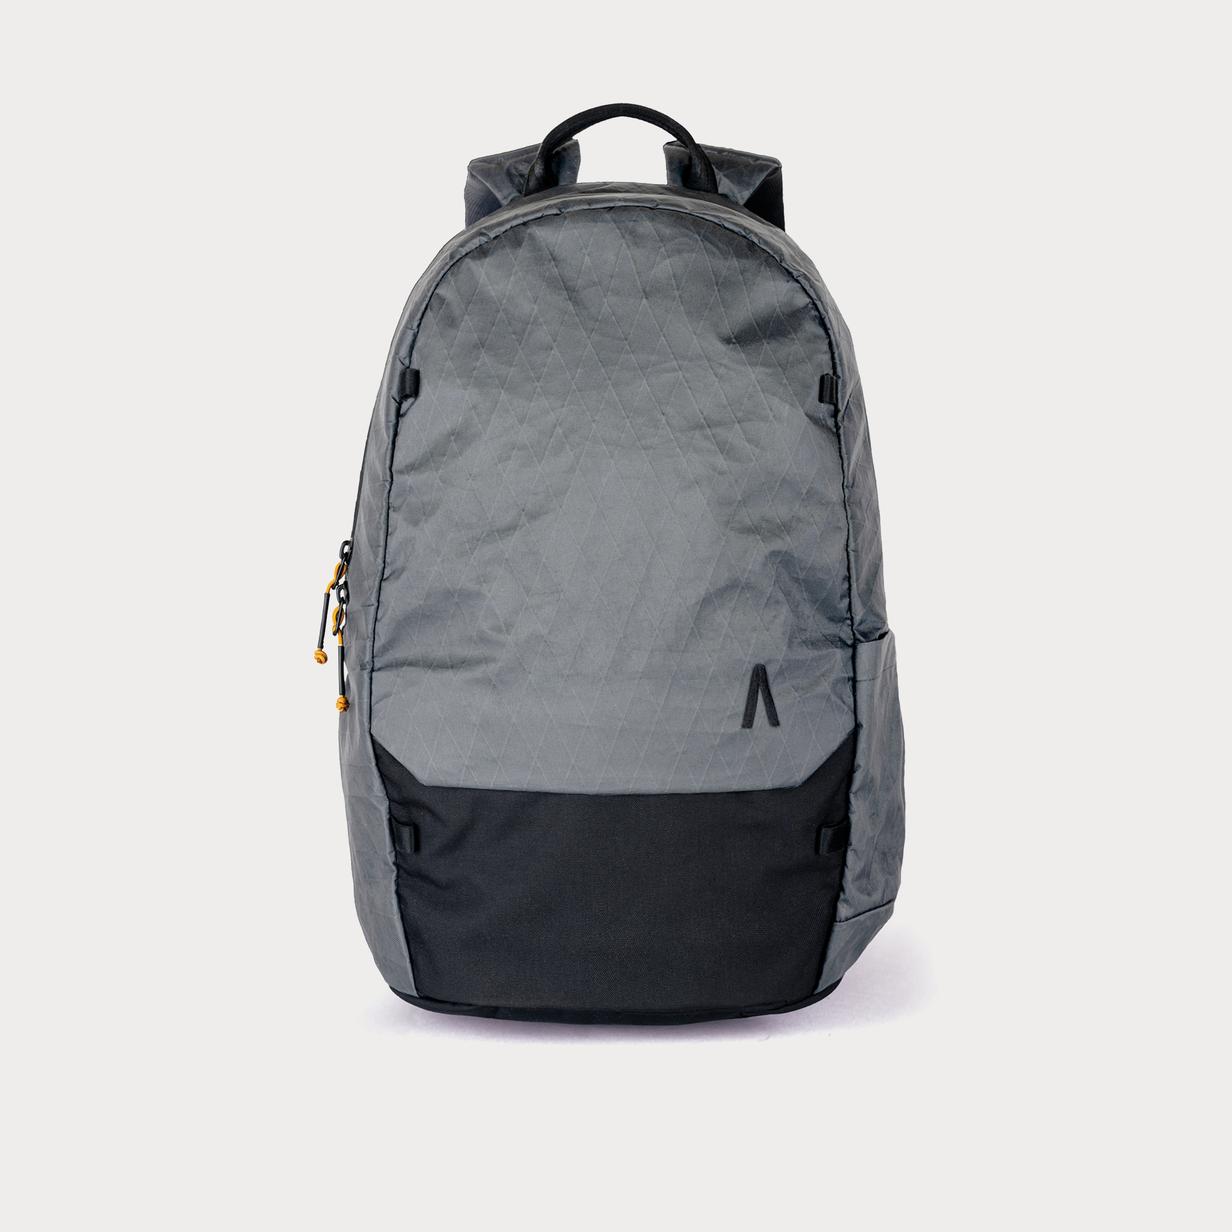 Moment CE RDP 00504 Boundary Supply Rennen X Pac Recycled Laptop Daypack 22 L urbane grey 01